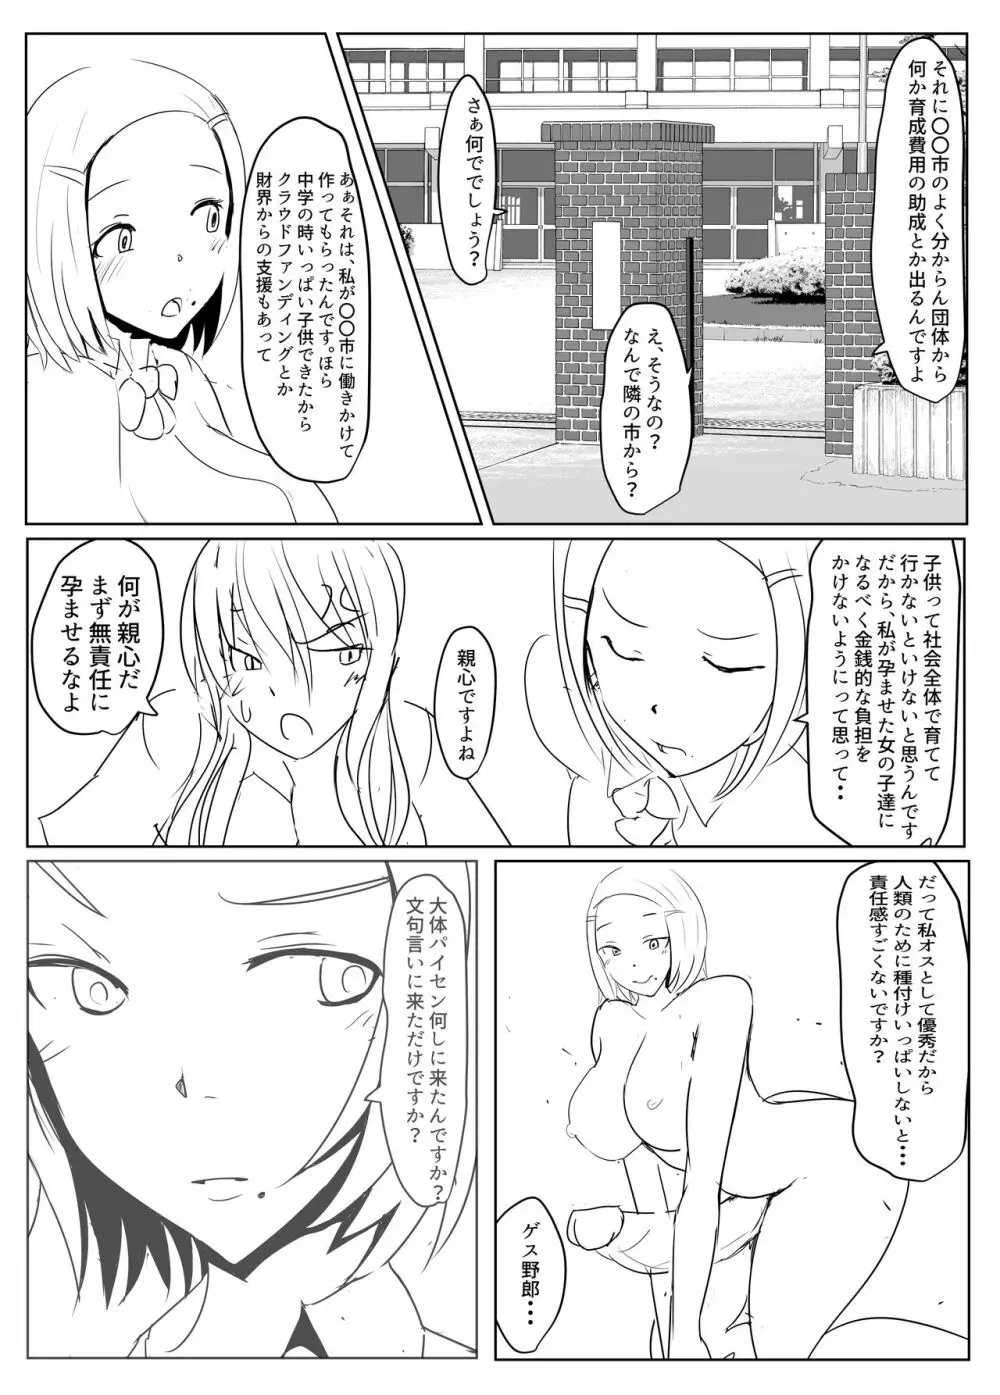 Diary Of An Easy Futanari Girl ~Girls-Only Breeding Meeting Part 3 Episodes 2 and 3 Page.31